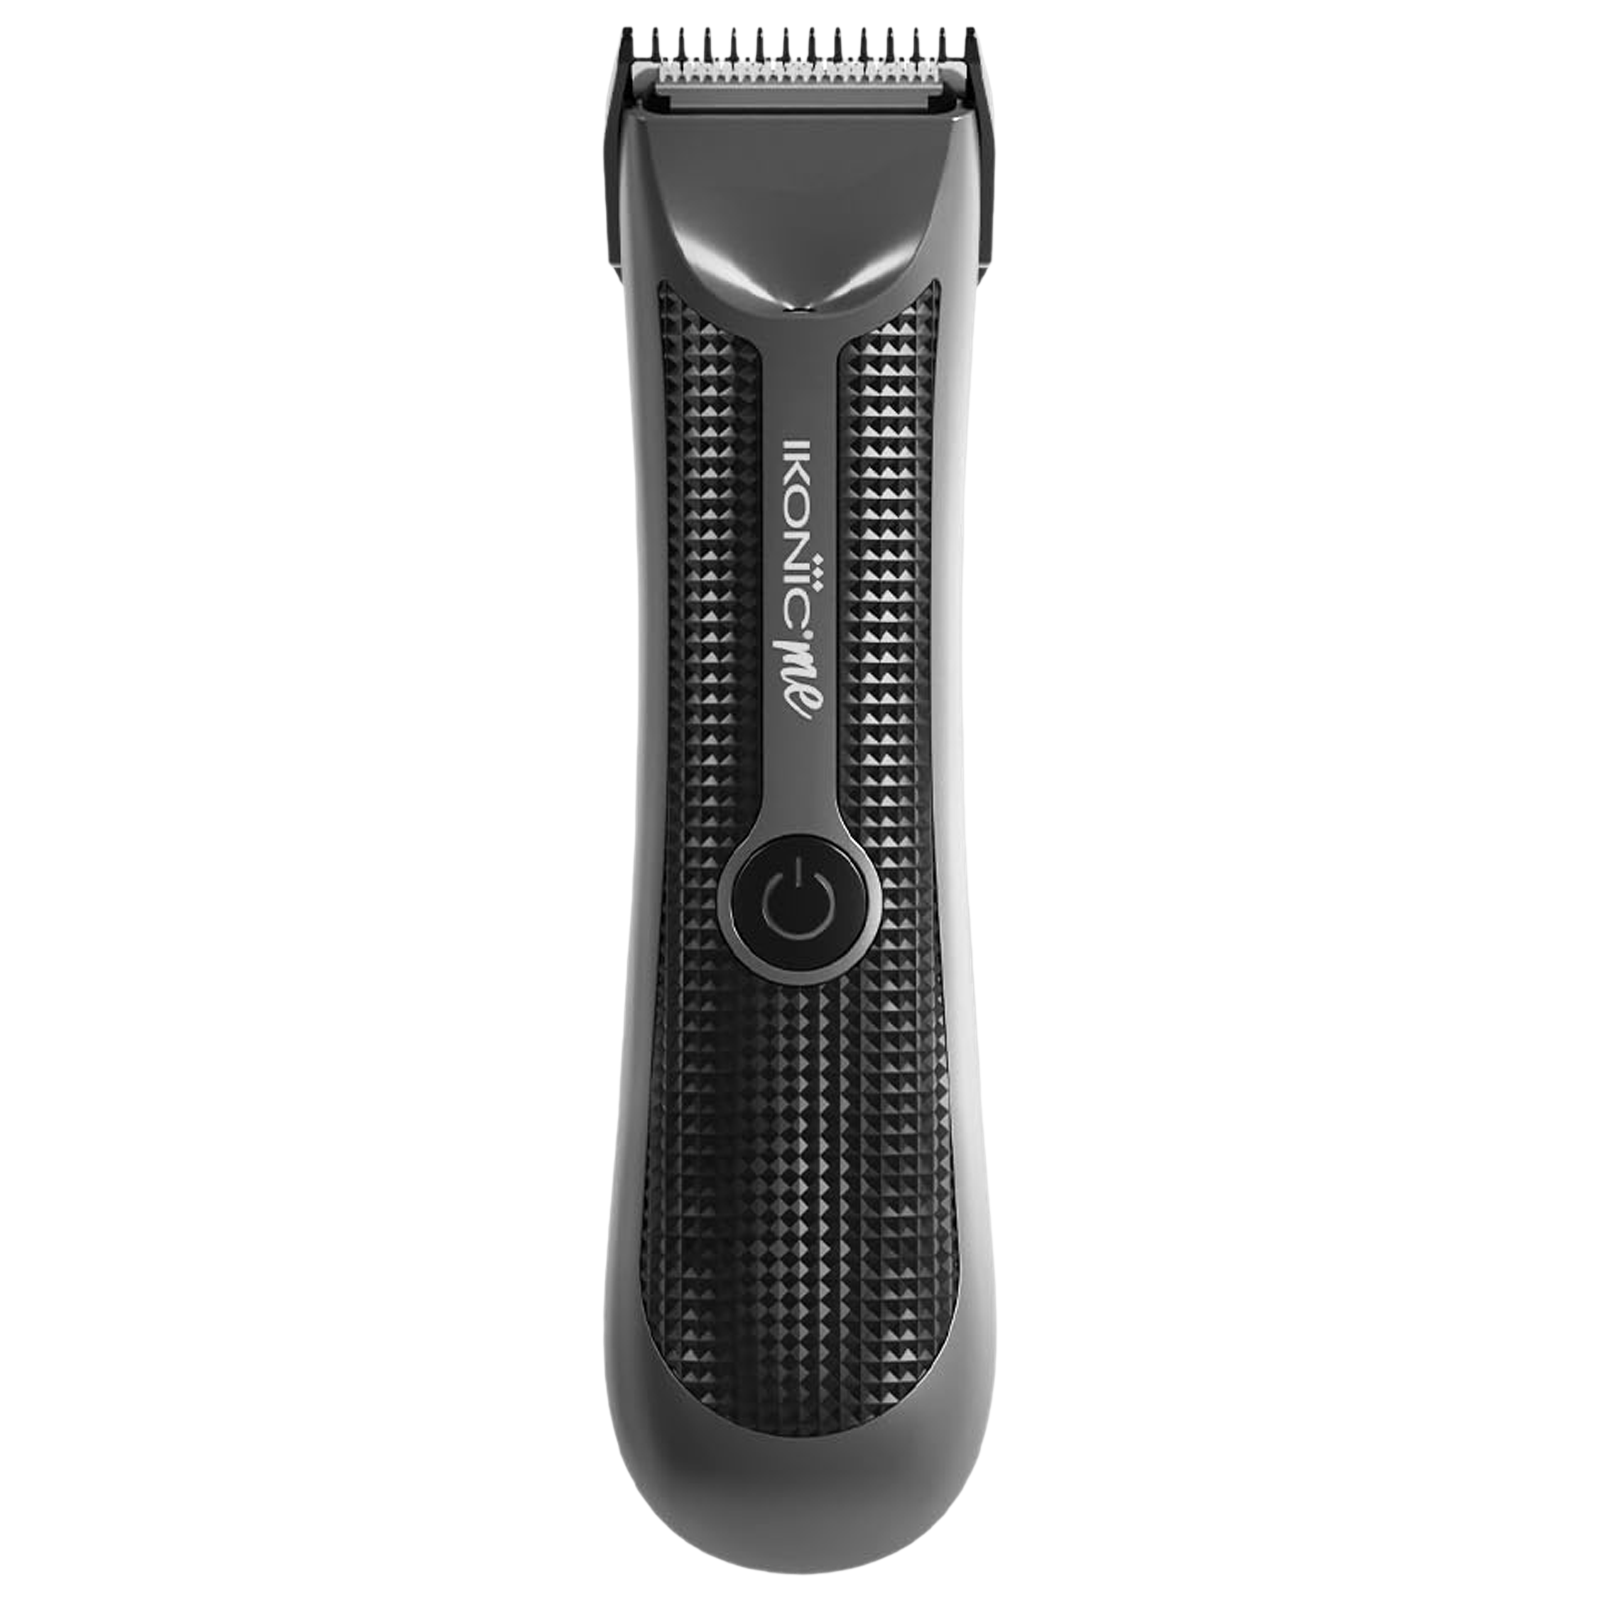 Ikonic Rechargeable Cordless Dry Trimmer for Beard and Body with 3 Length Settings for Men (90mins Runtime, Quick Charging, Grey)